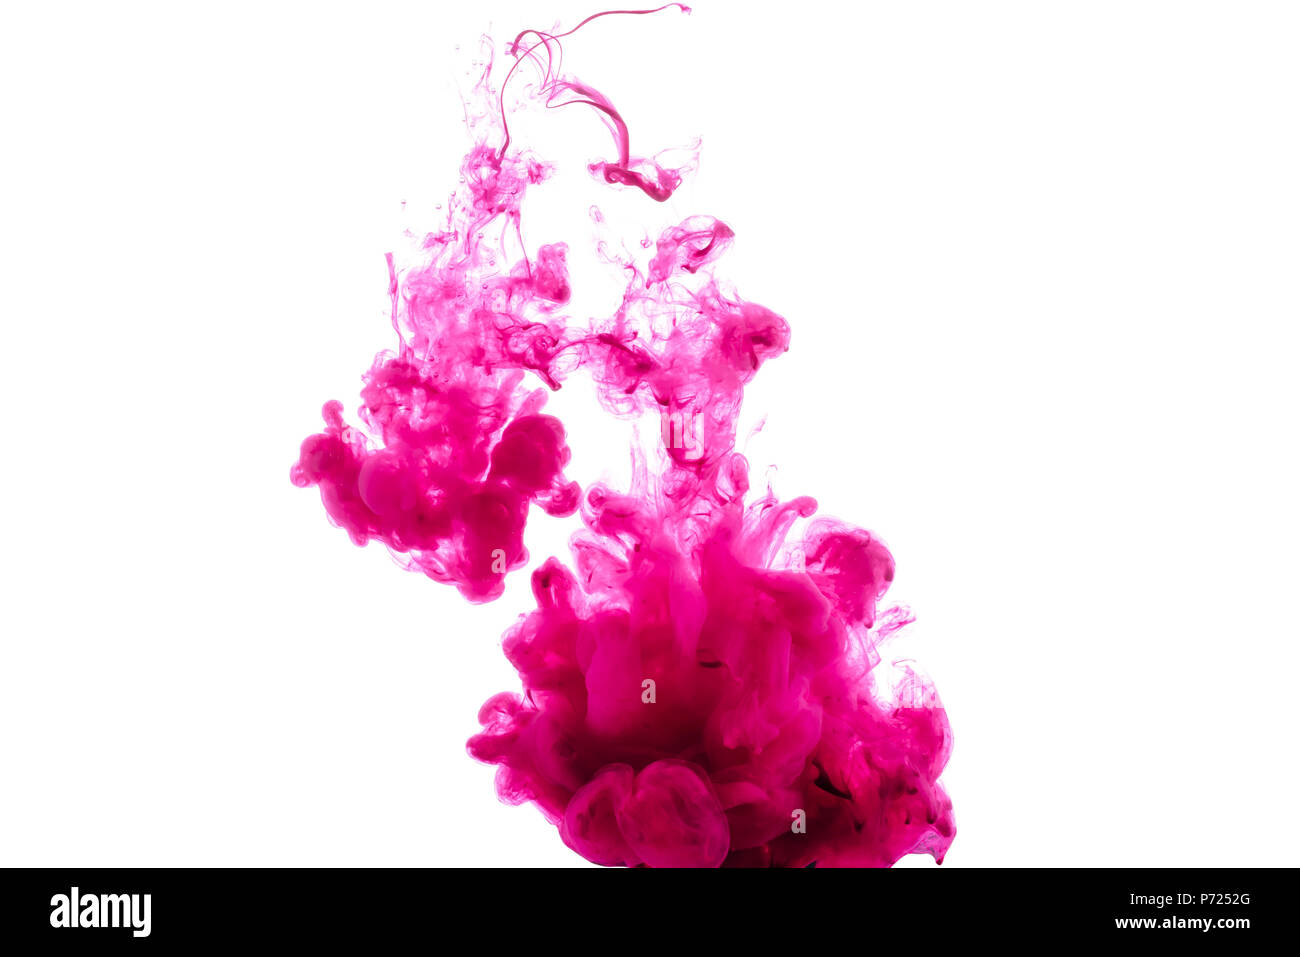 close-up view of bright pink paint splashes isolated on white Stock Photo